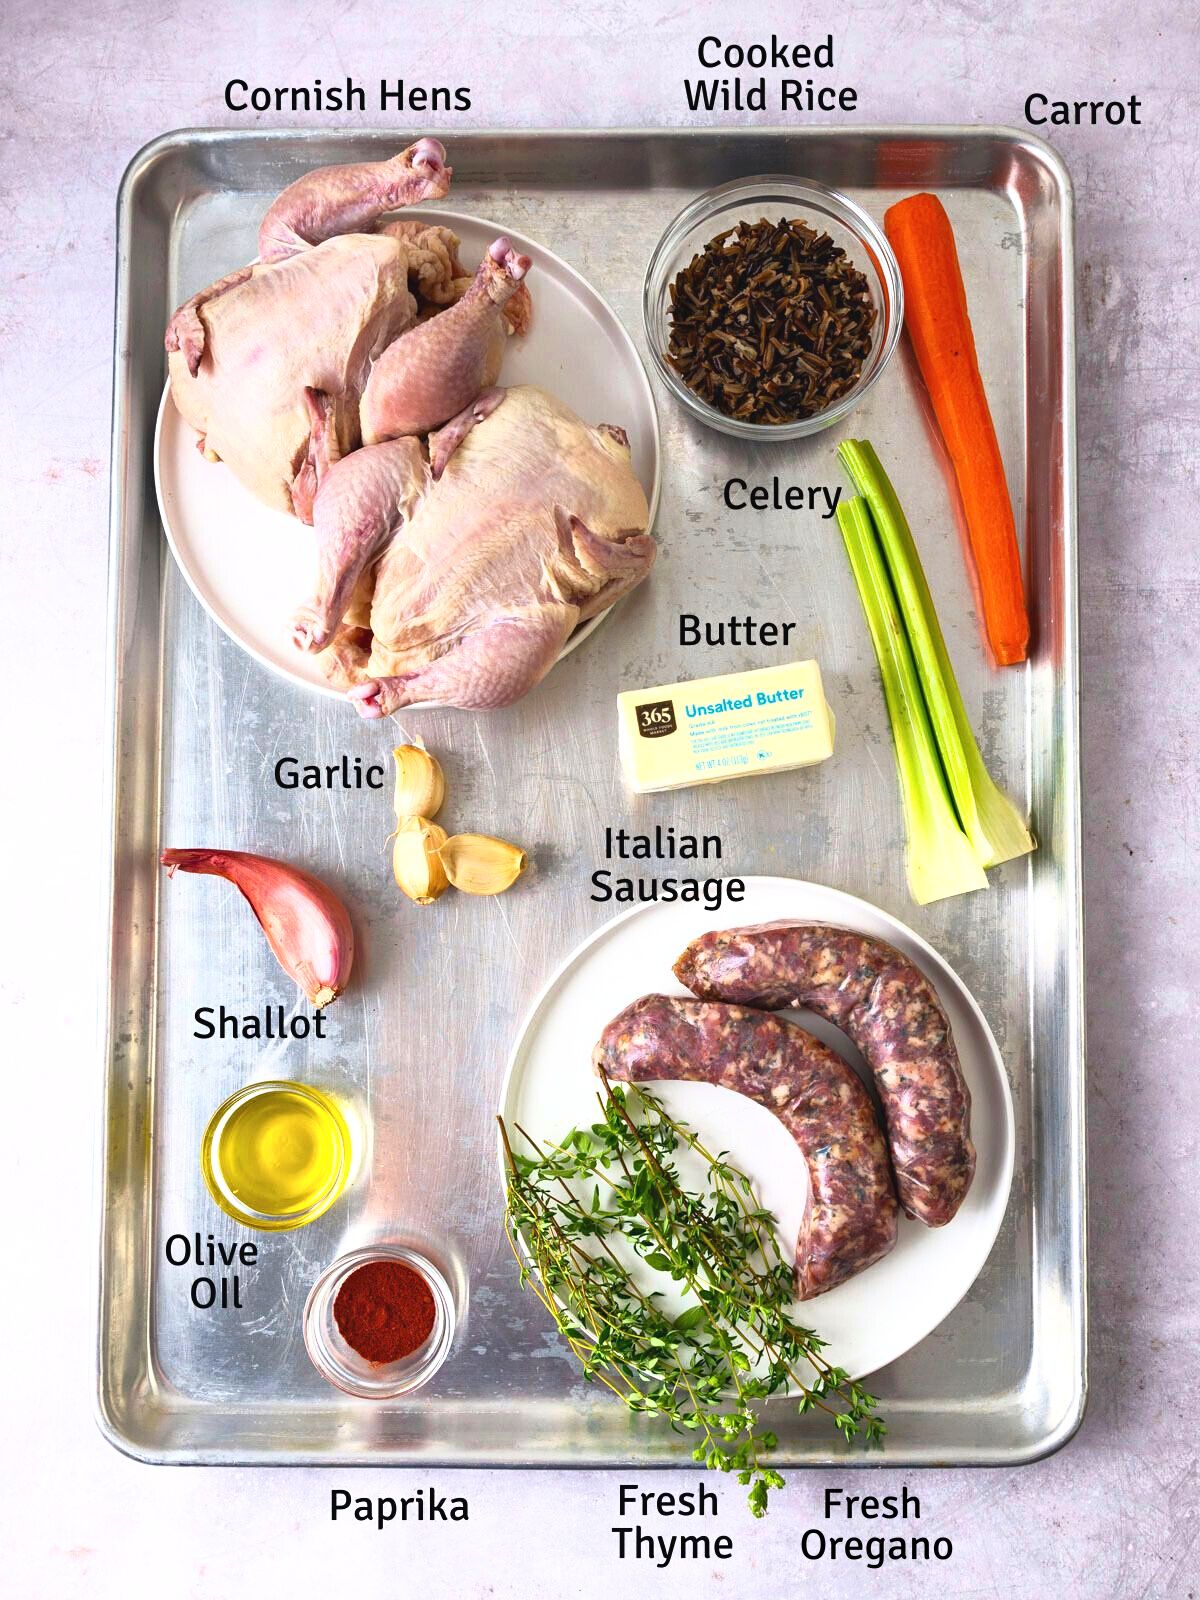 Ingredients for rice stuffed Cornish hens, including Italian sausage, herbs and compound butter.